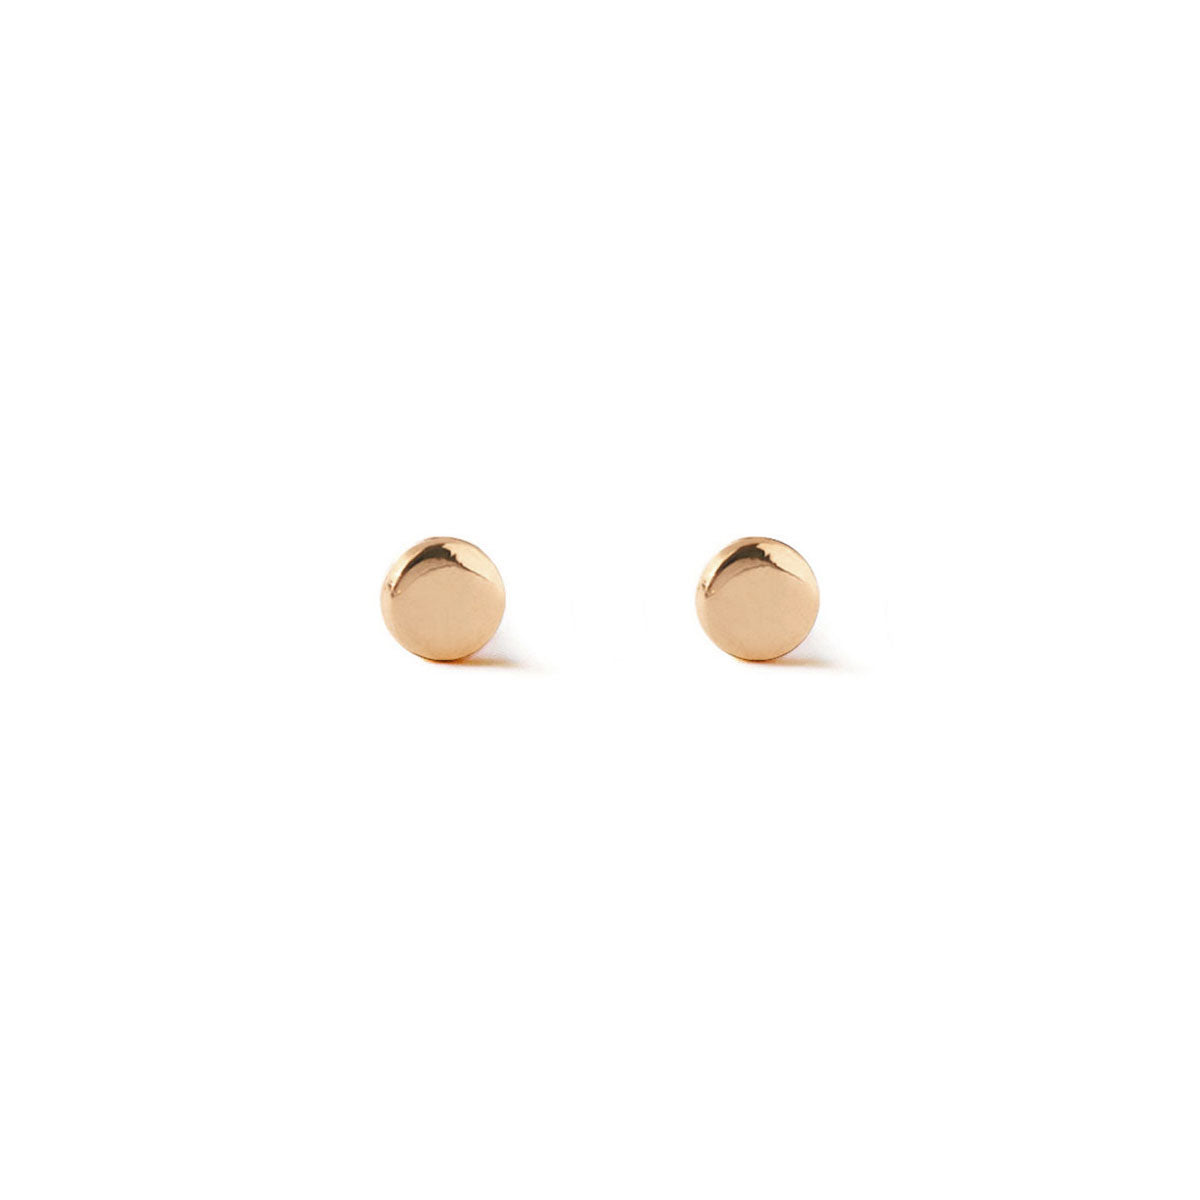 Hoberta Real 14k solid Round Yellow Gold Tiny Circle Stud Earrings with  Screw back for Women Girls Men for Sensitive ears Small & Minimalist Dot  Studs